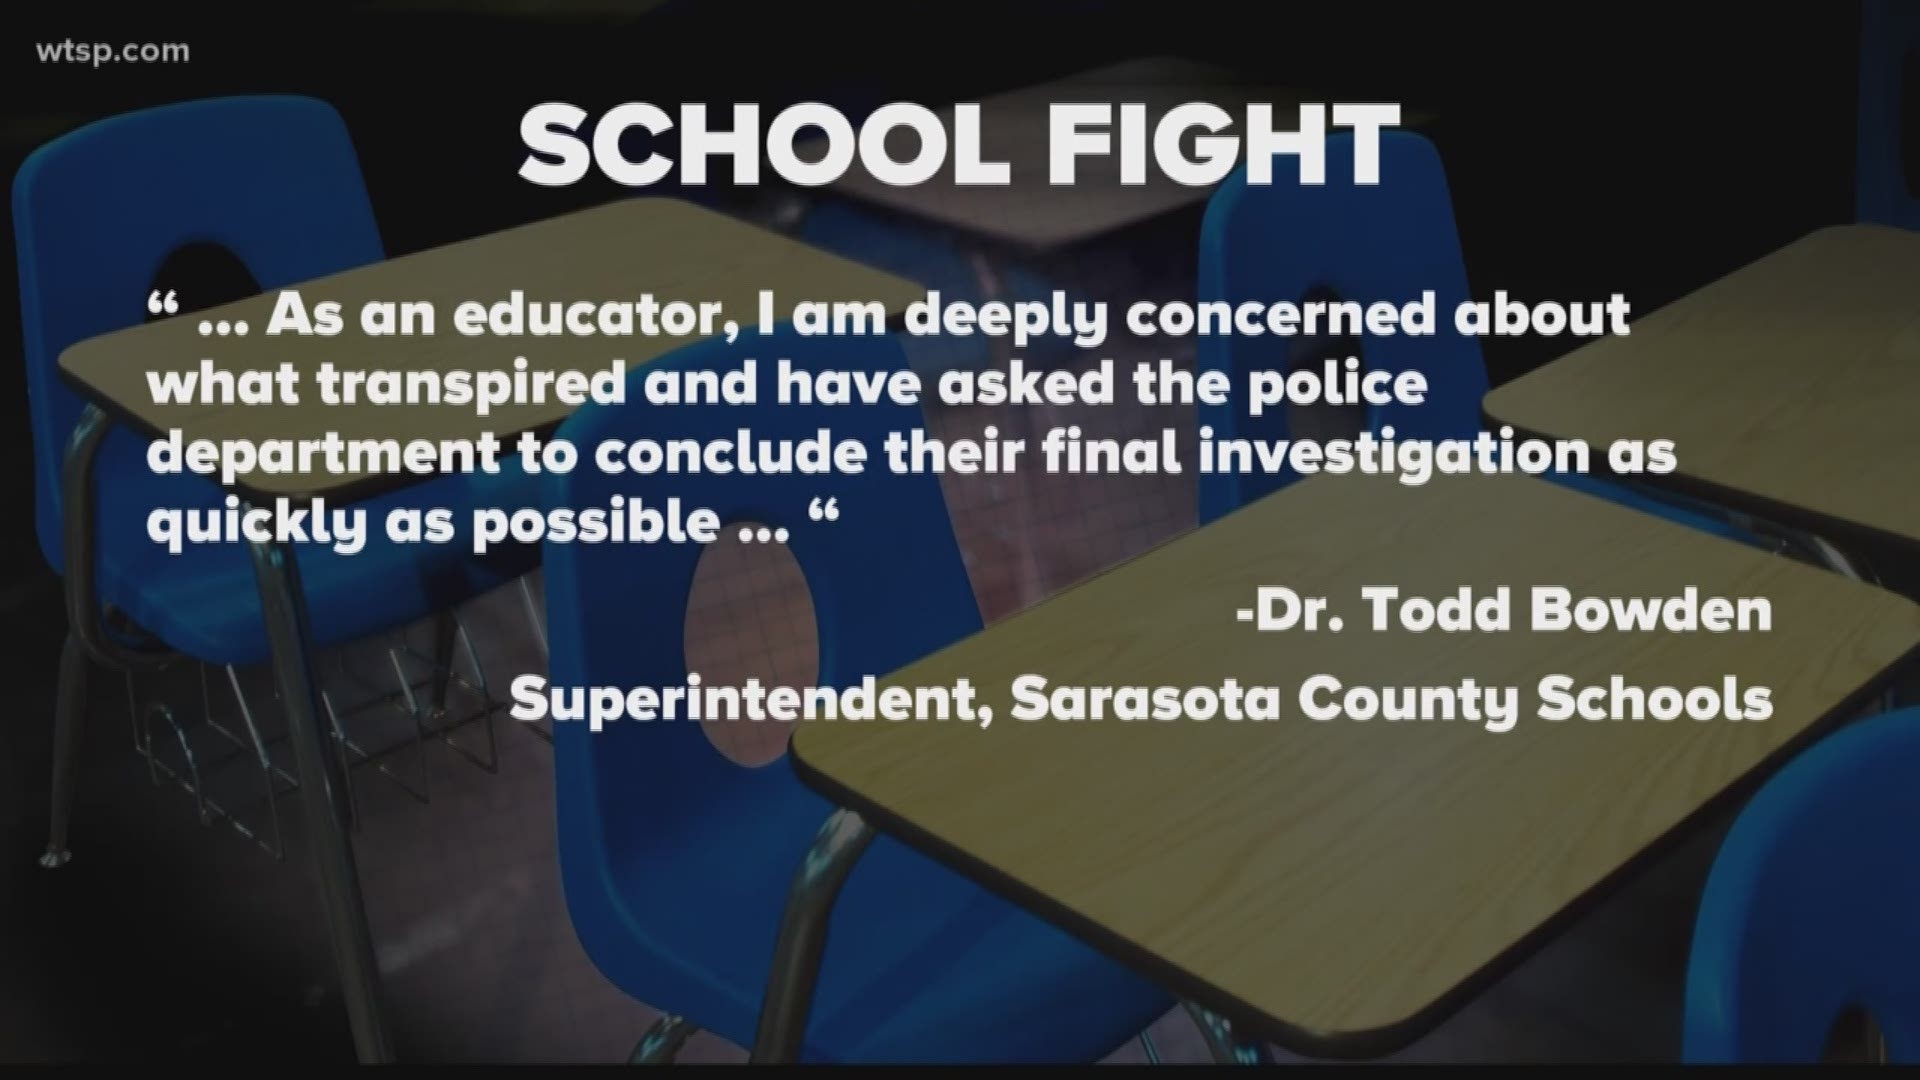 The teacher has been removed from the school while an investigation takes place. https://on.wtsp.com/2lR5qlK